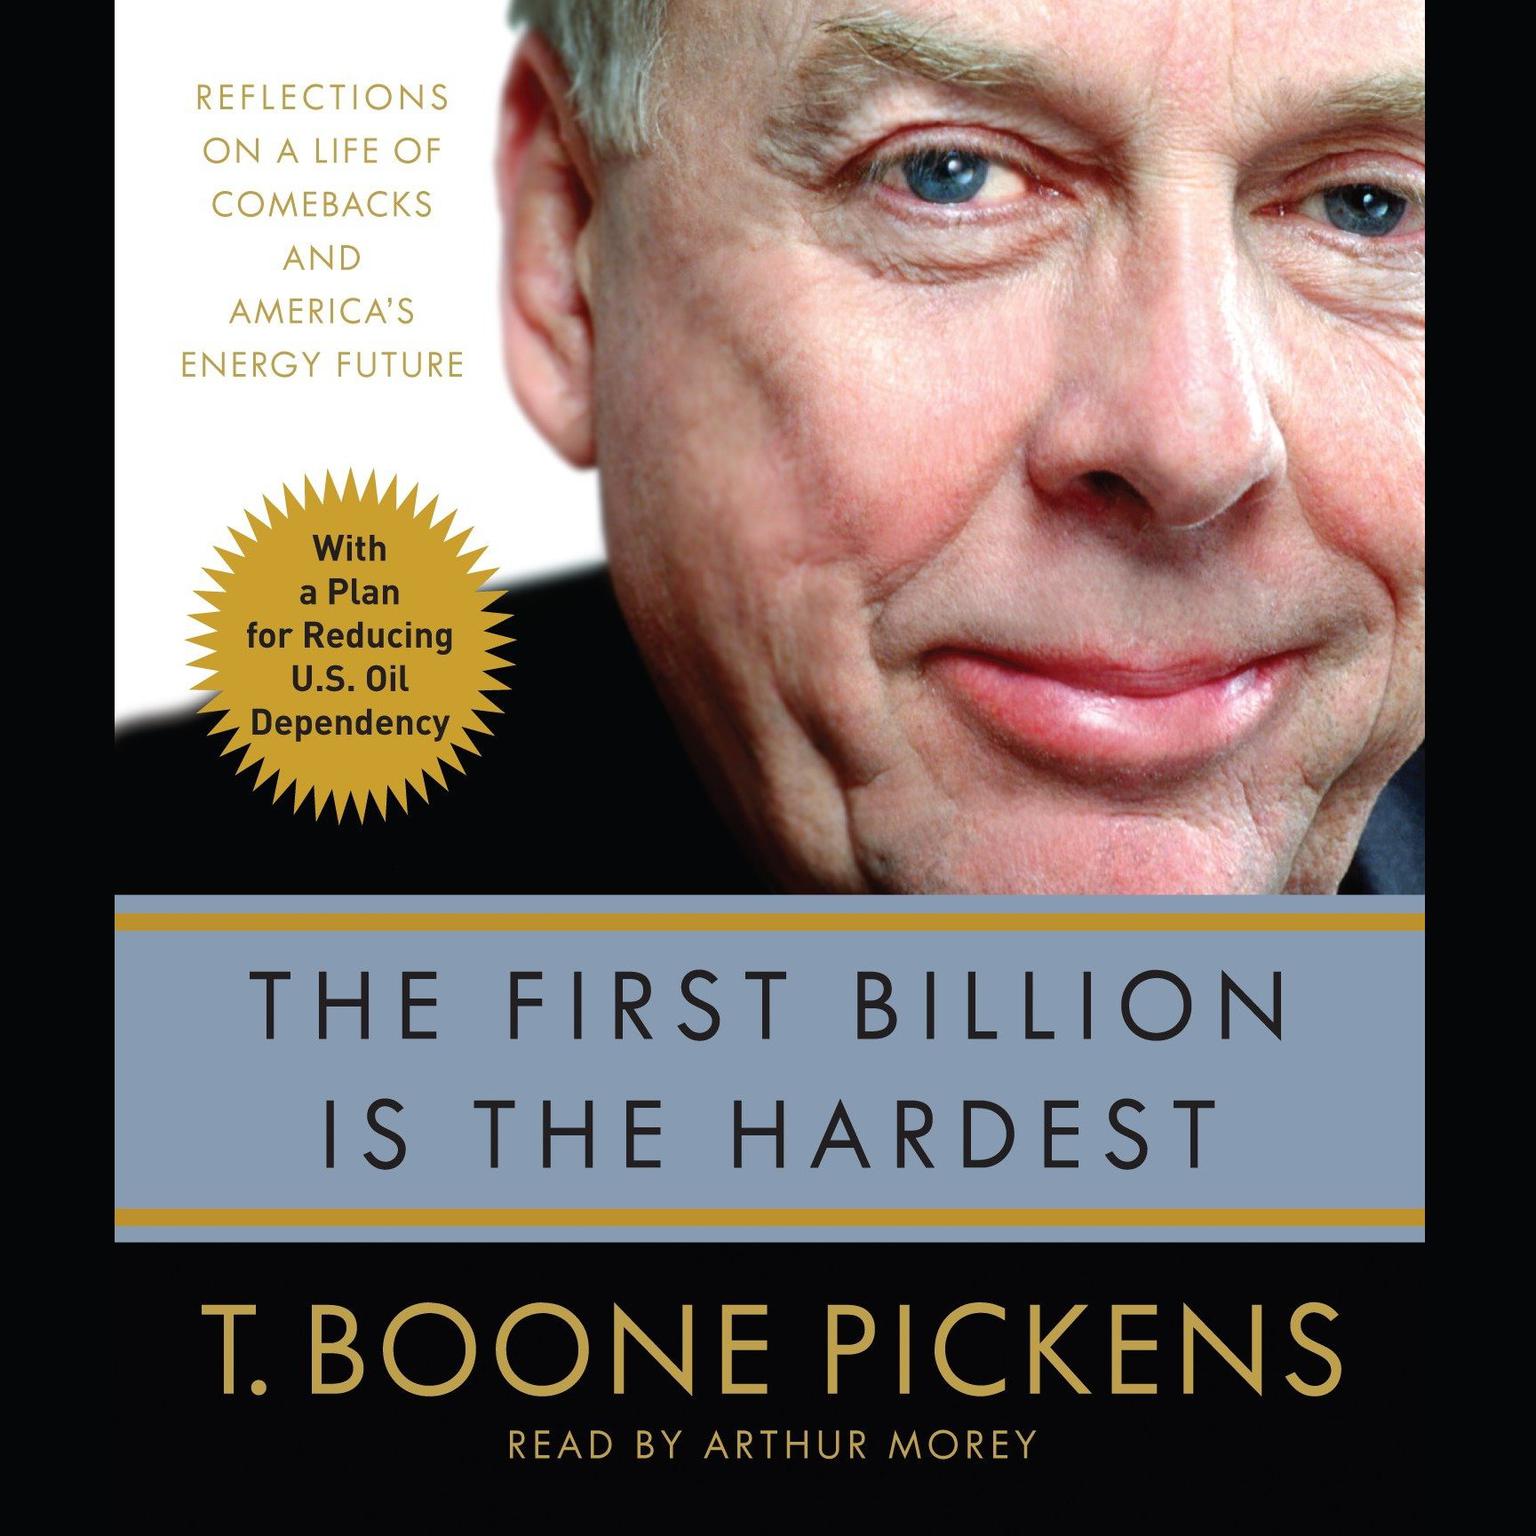 The First Billion Is the Hardest (Abridged): Reflections on a Life of Comebacks and Americas Energy Future Audiobook, by T. Boone Pickens